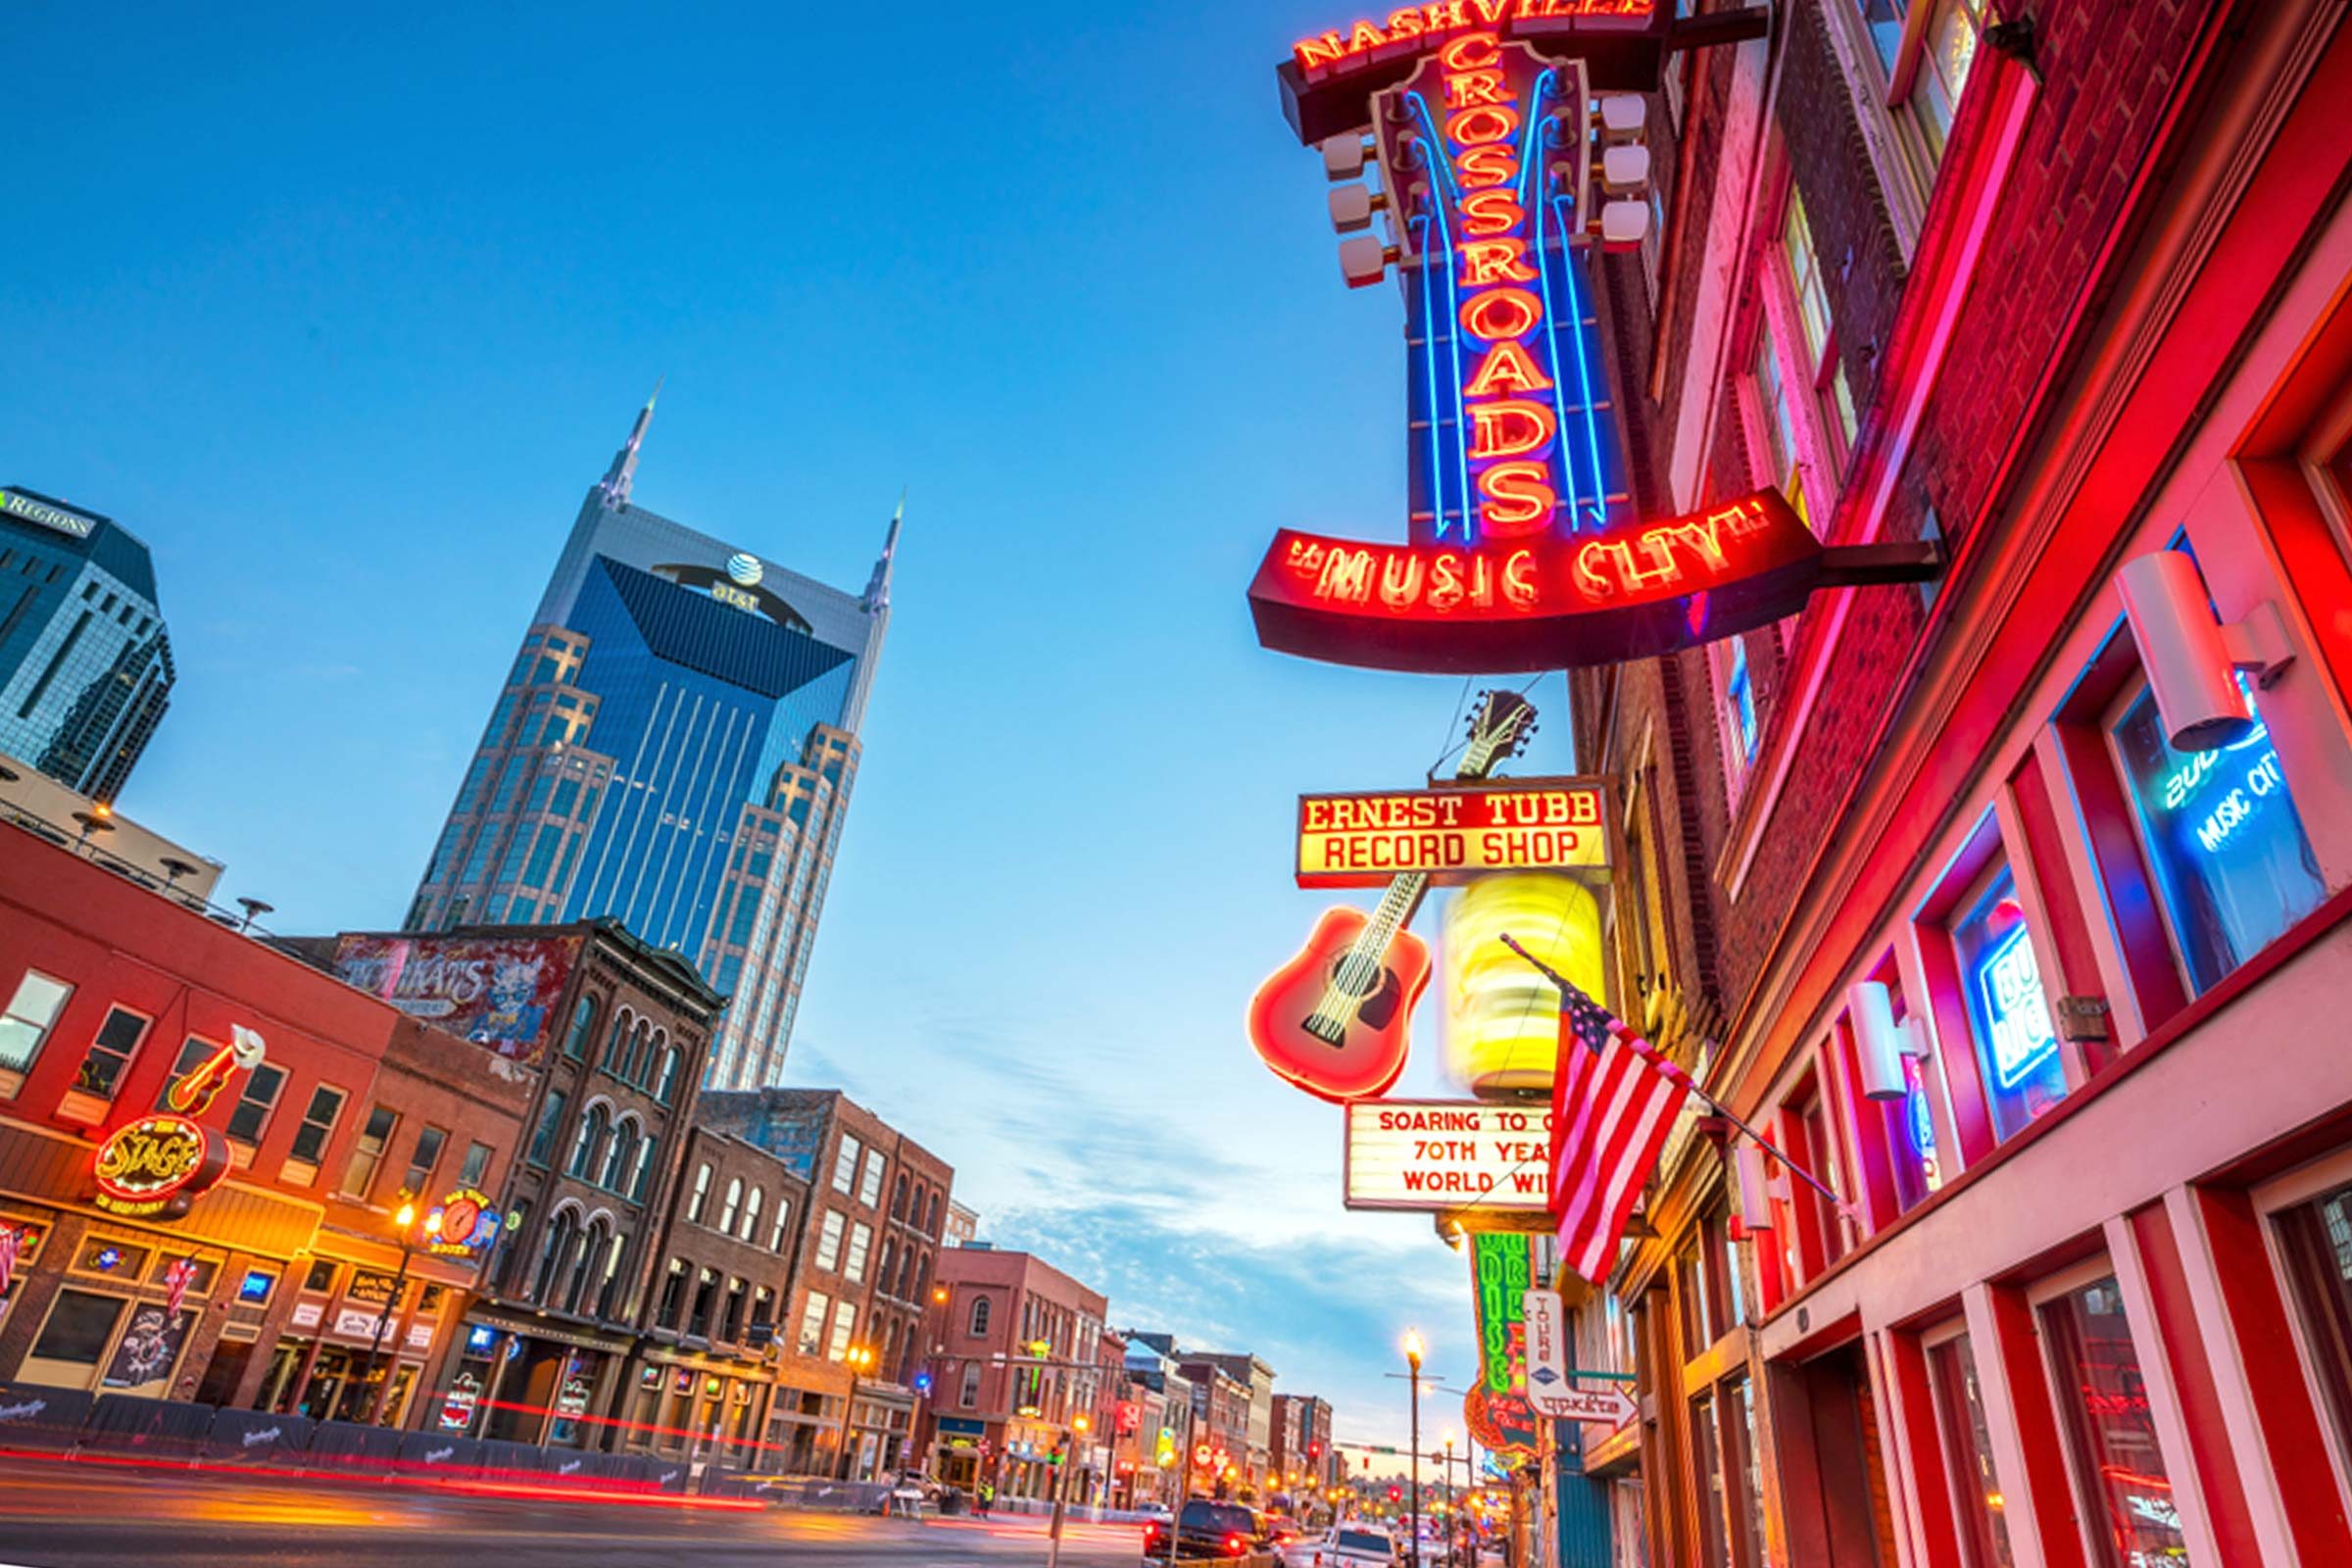 Neon signs on Lower Broadway Area in Nashville, Tennessee, USA